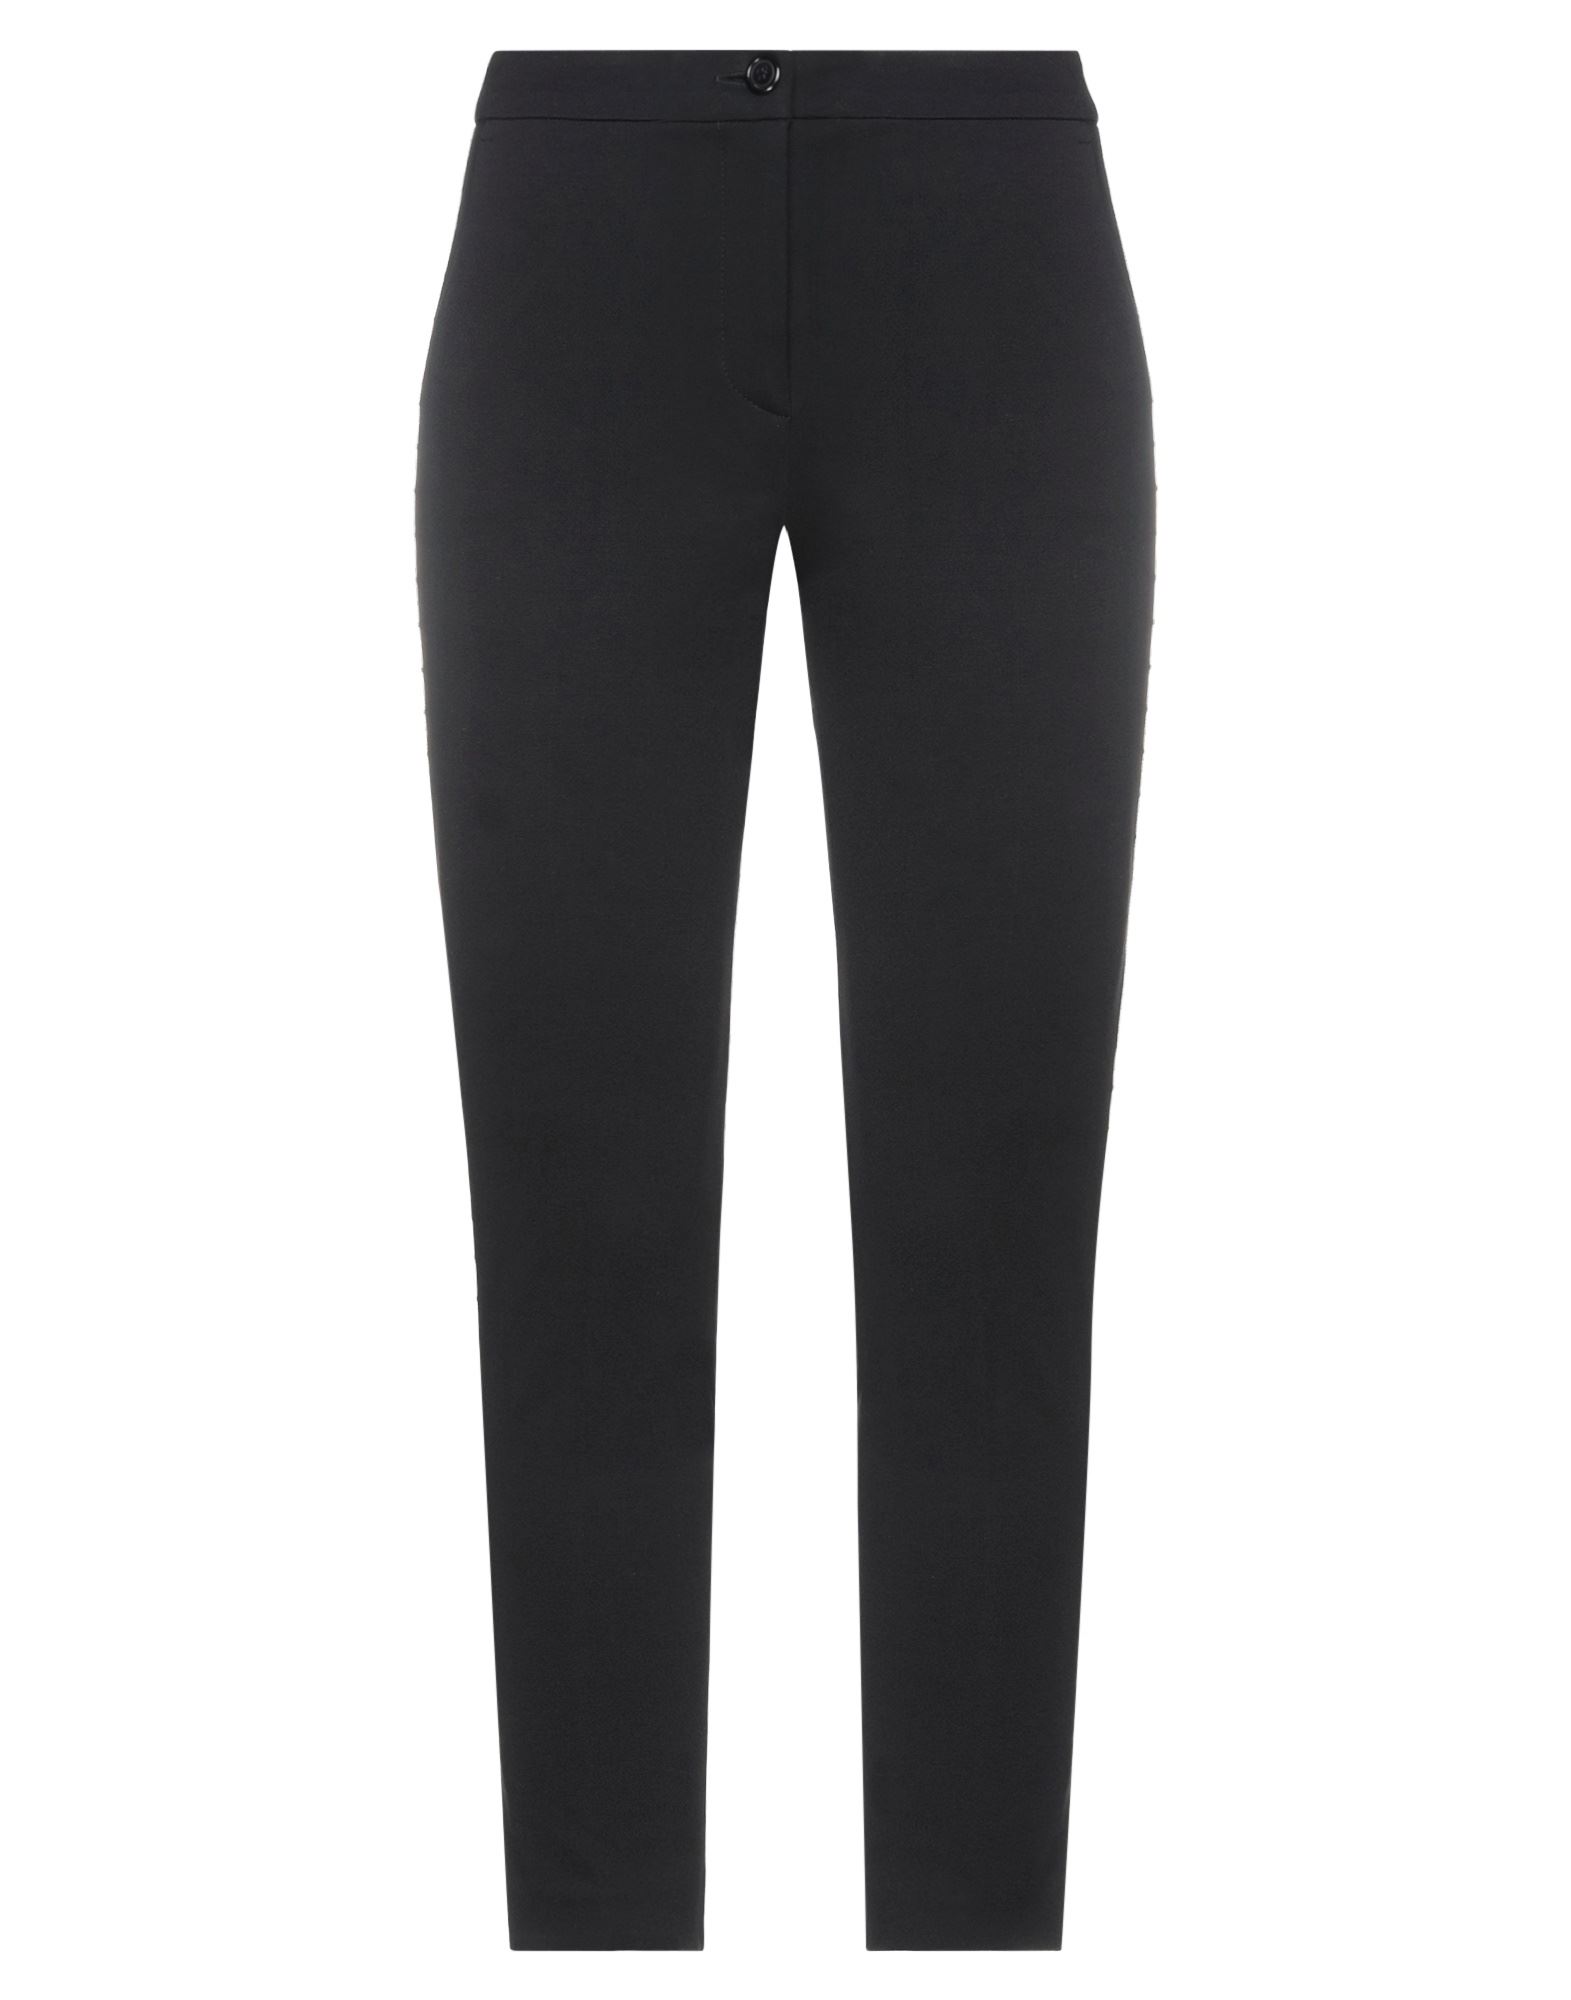 Access Fashion Pants In Black